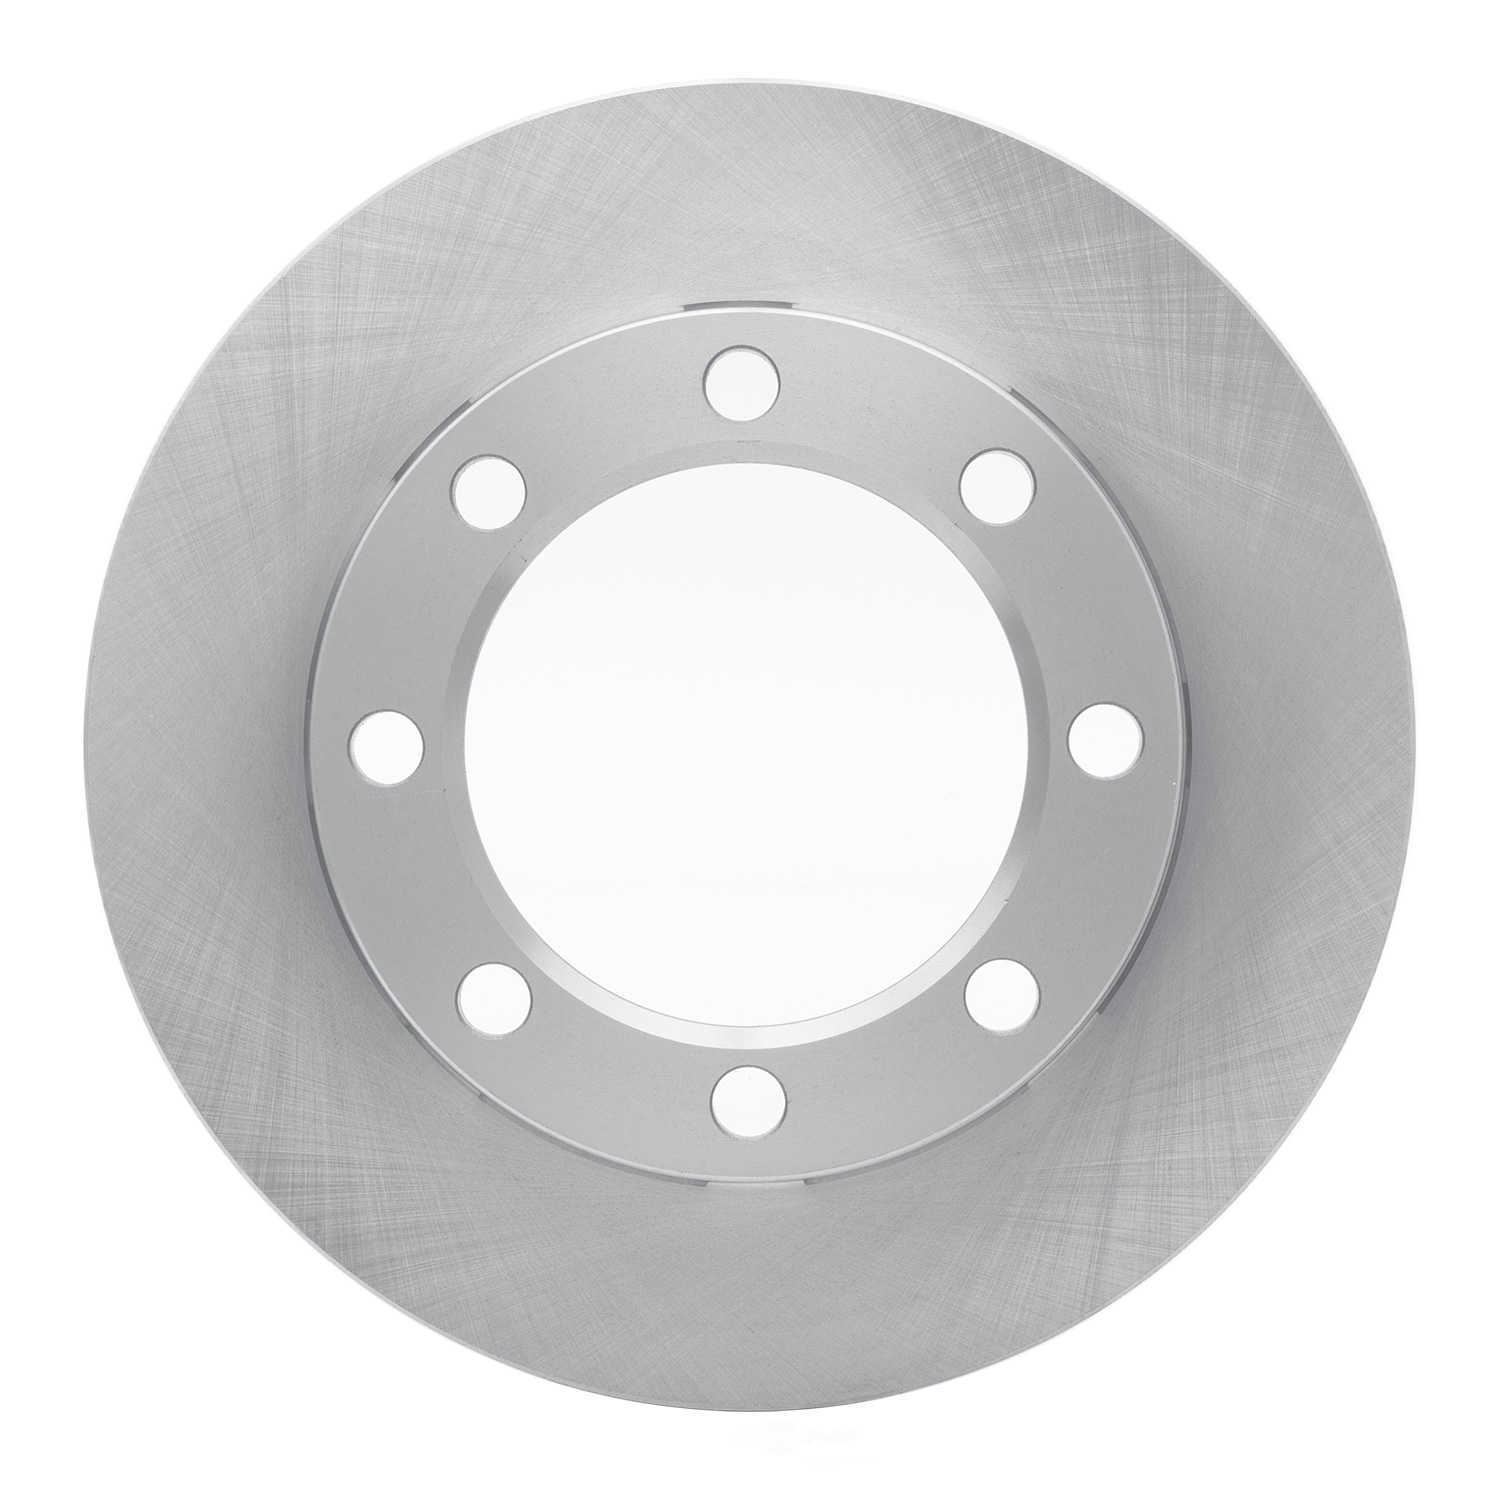 DFC - DFC Brake Rotor (Front) - DF1 600-48064